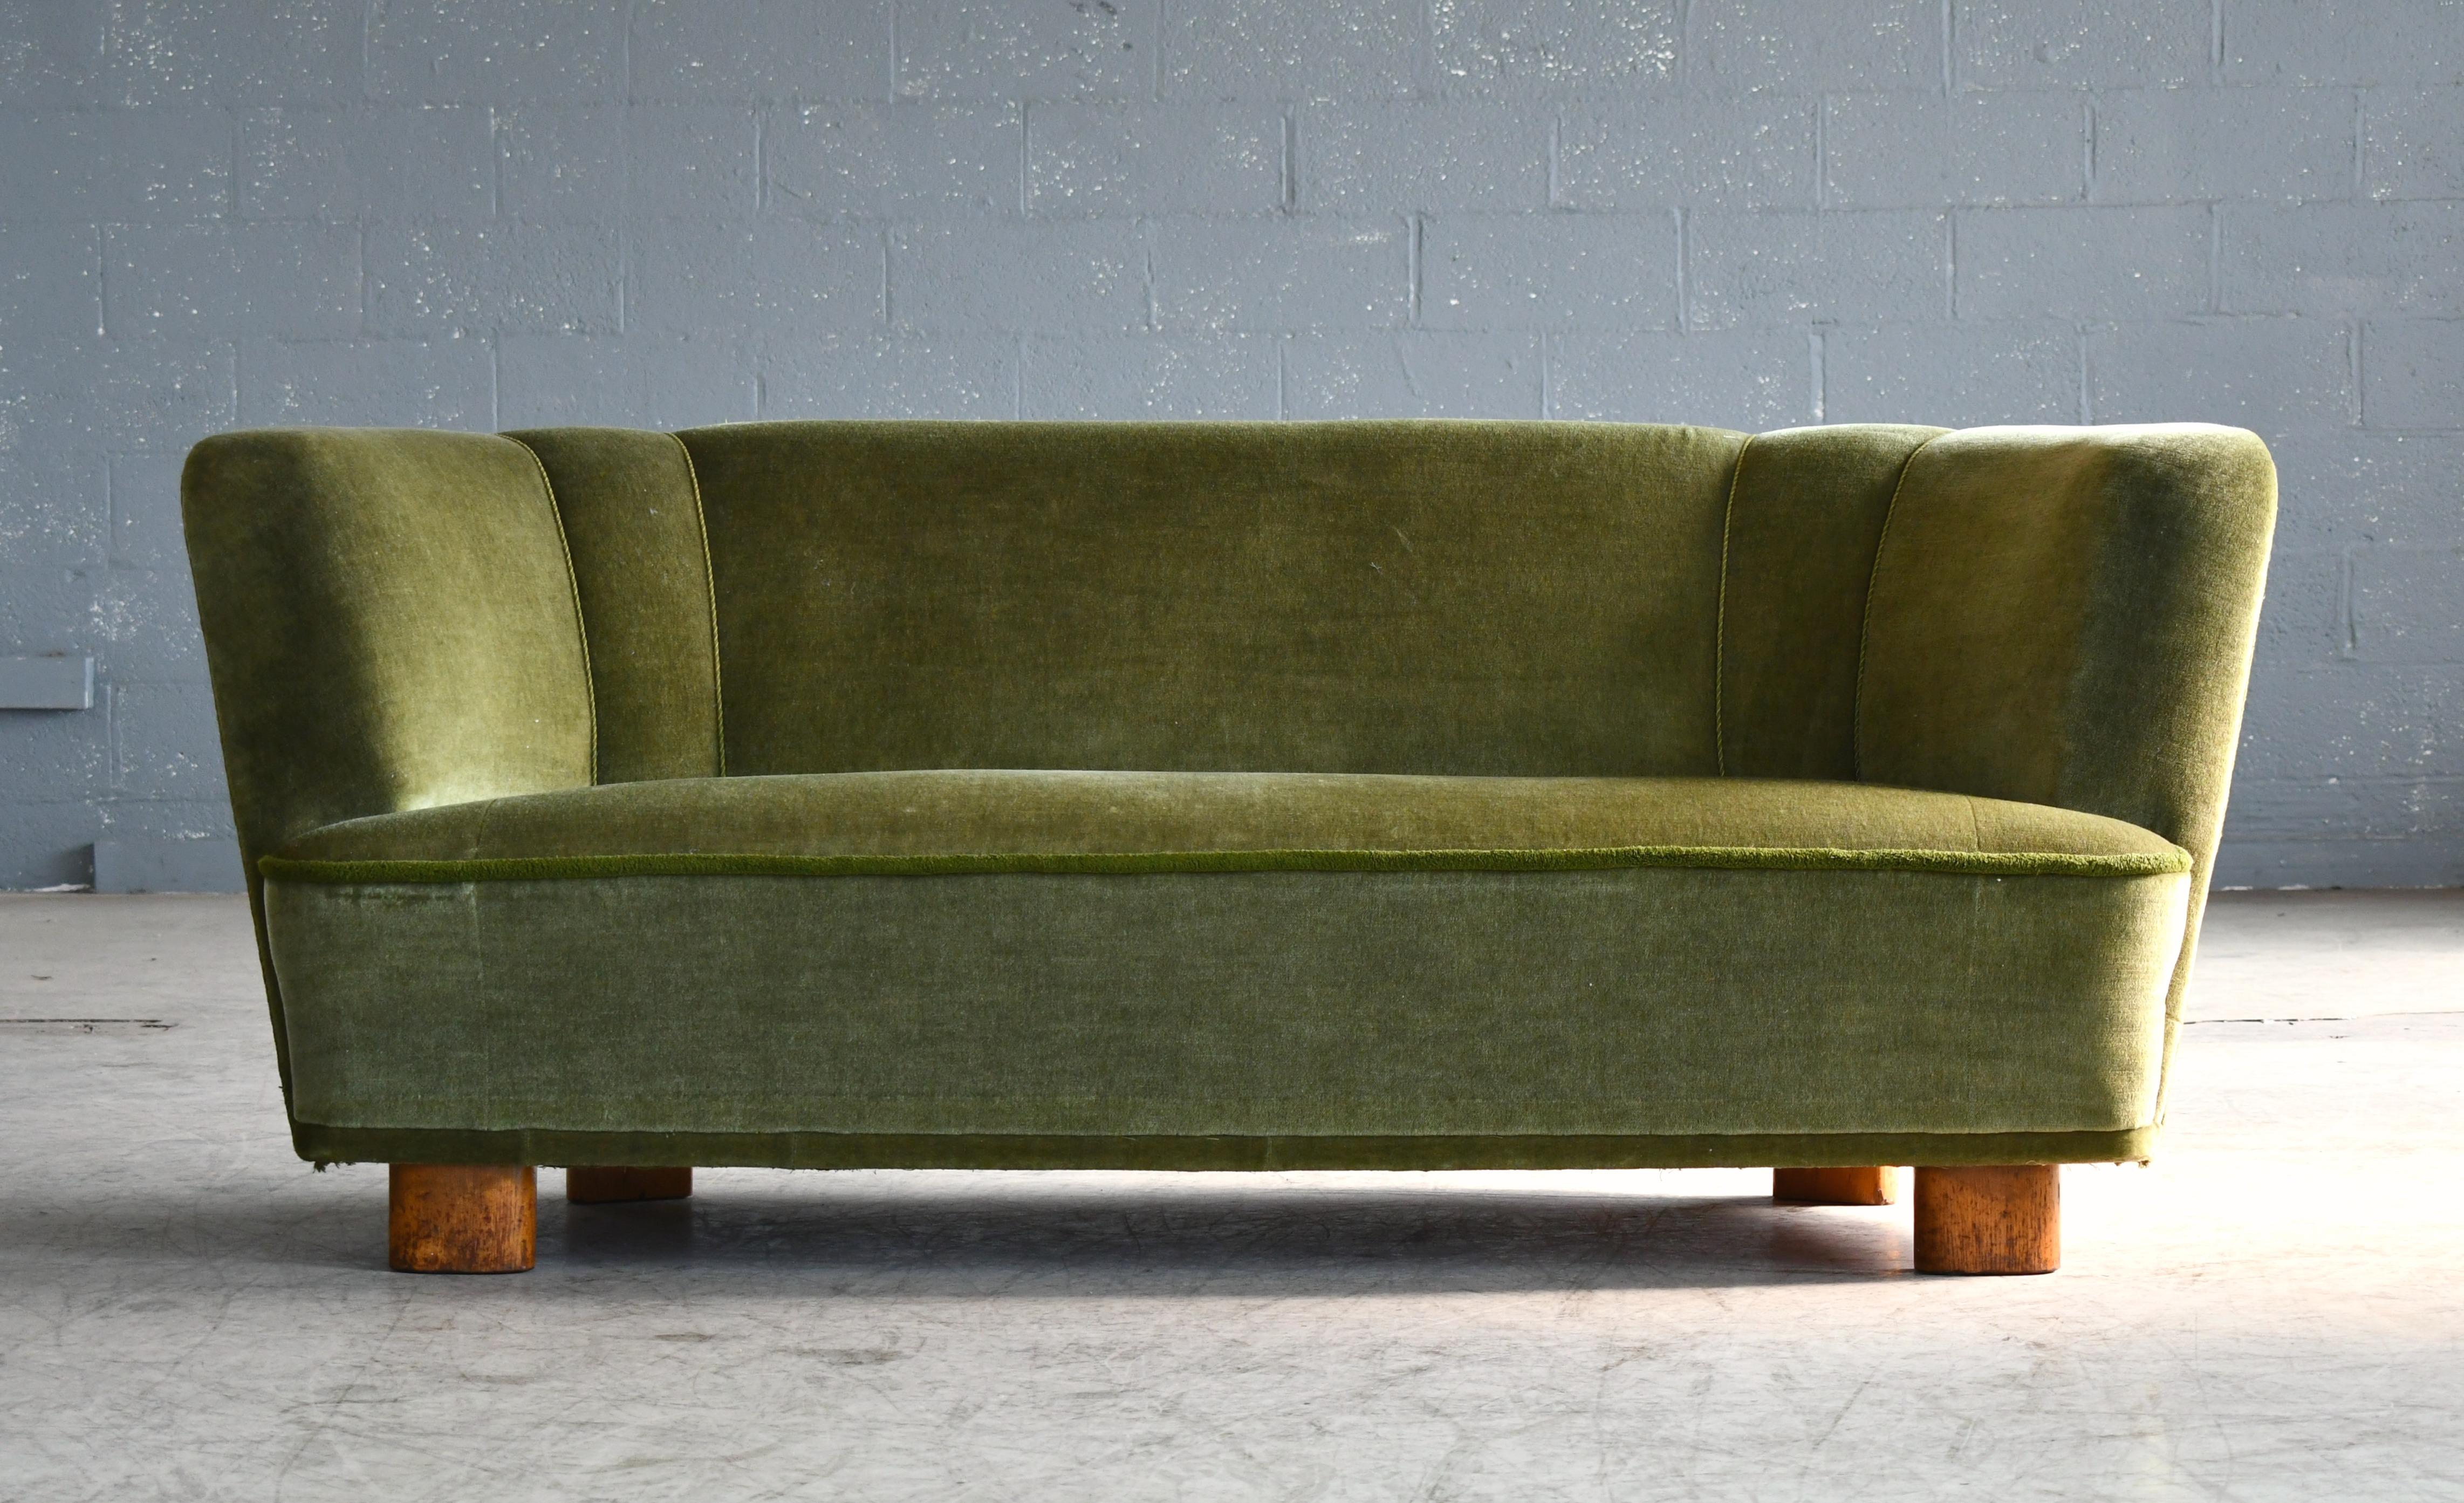 Beautiful and very elegant 1940s curved three-seat sofa in green velvet fabric. The sofa has springs in the seat and the backrest and the cushions are nice and firm and the sofa very sturdy. The sofa has been re-upholstered in the past and the green